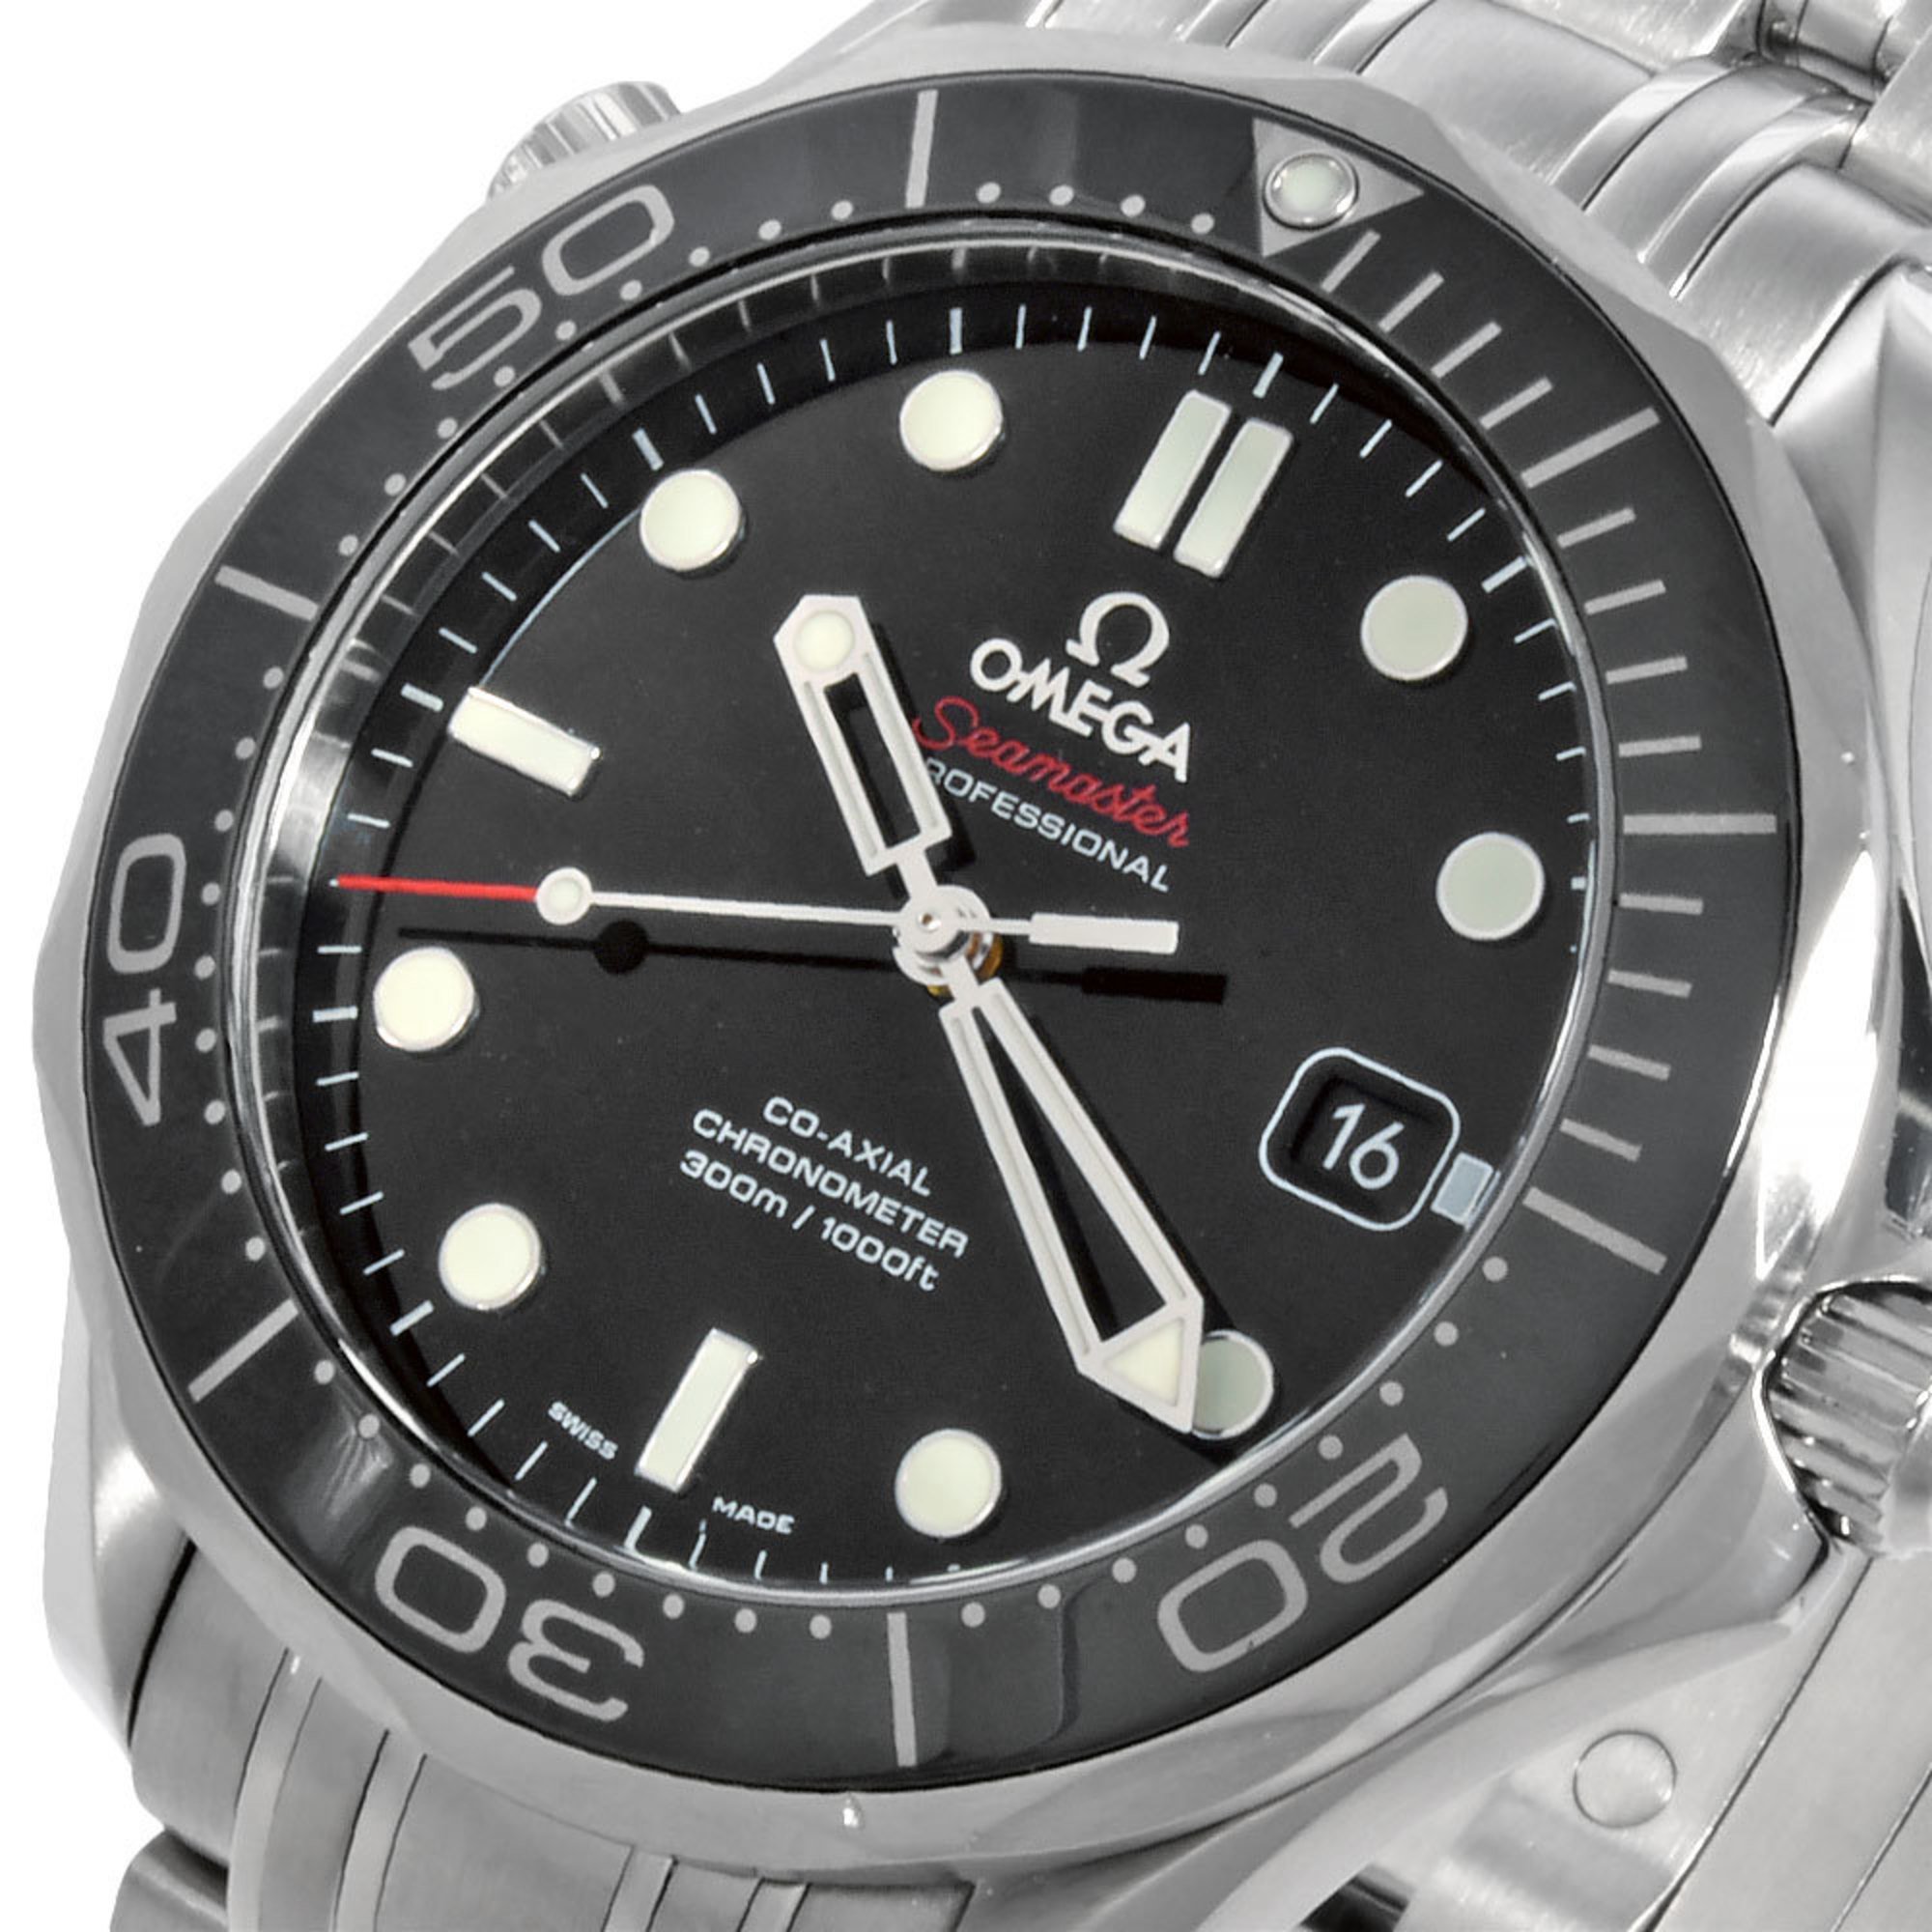 OMEGA 212.30.41.20.01.003 Seamaster Co-Axial Date 300M Watch Automatic Black Dial Stainless Steel Men's